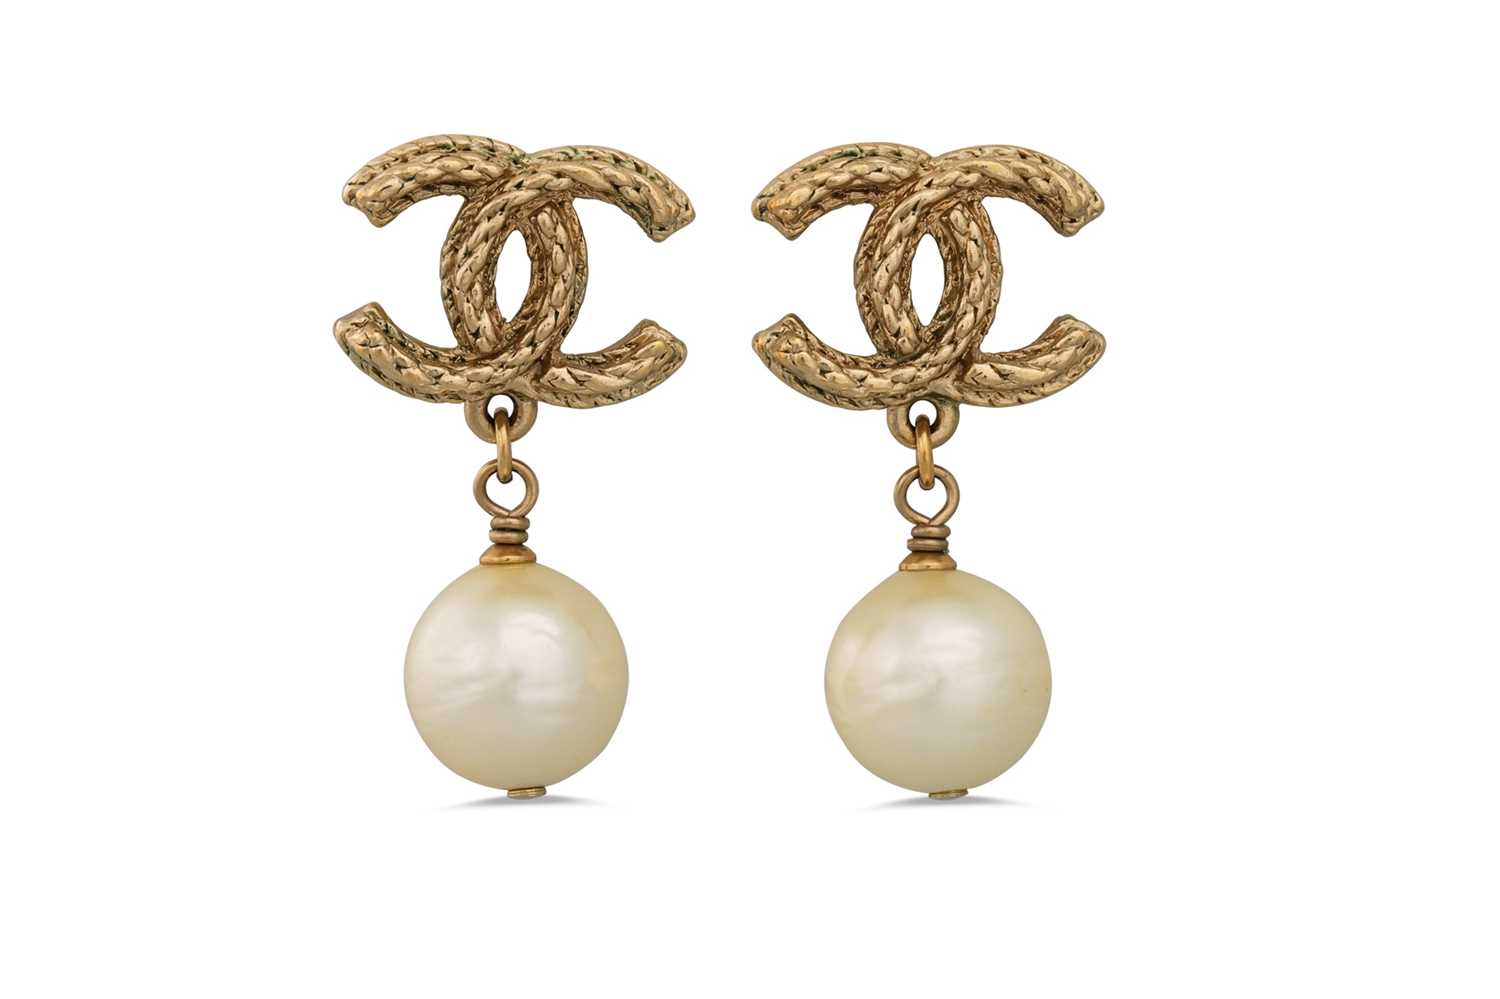 Lot 13 - A PAIR OF CHANEL DROP EARRINGS, the Double C